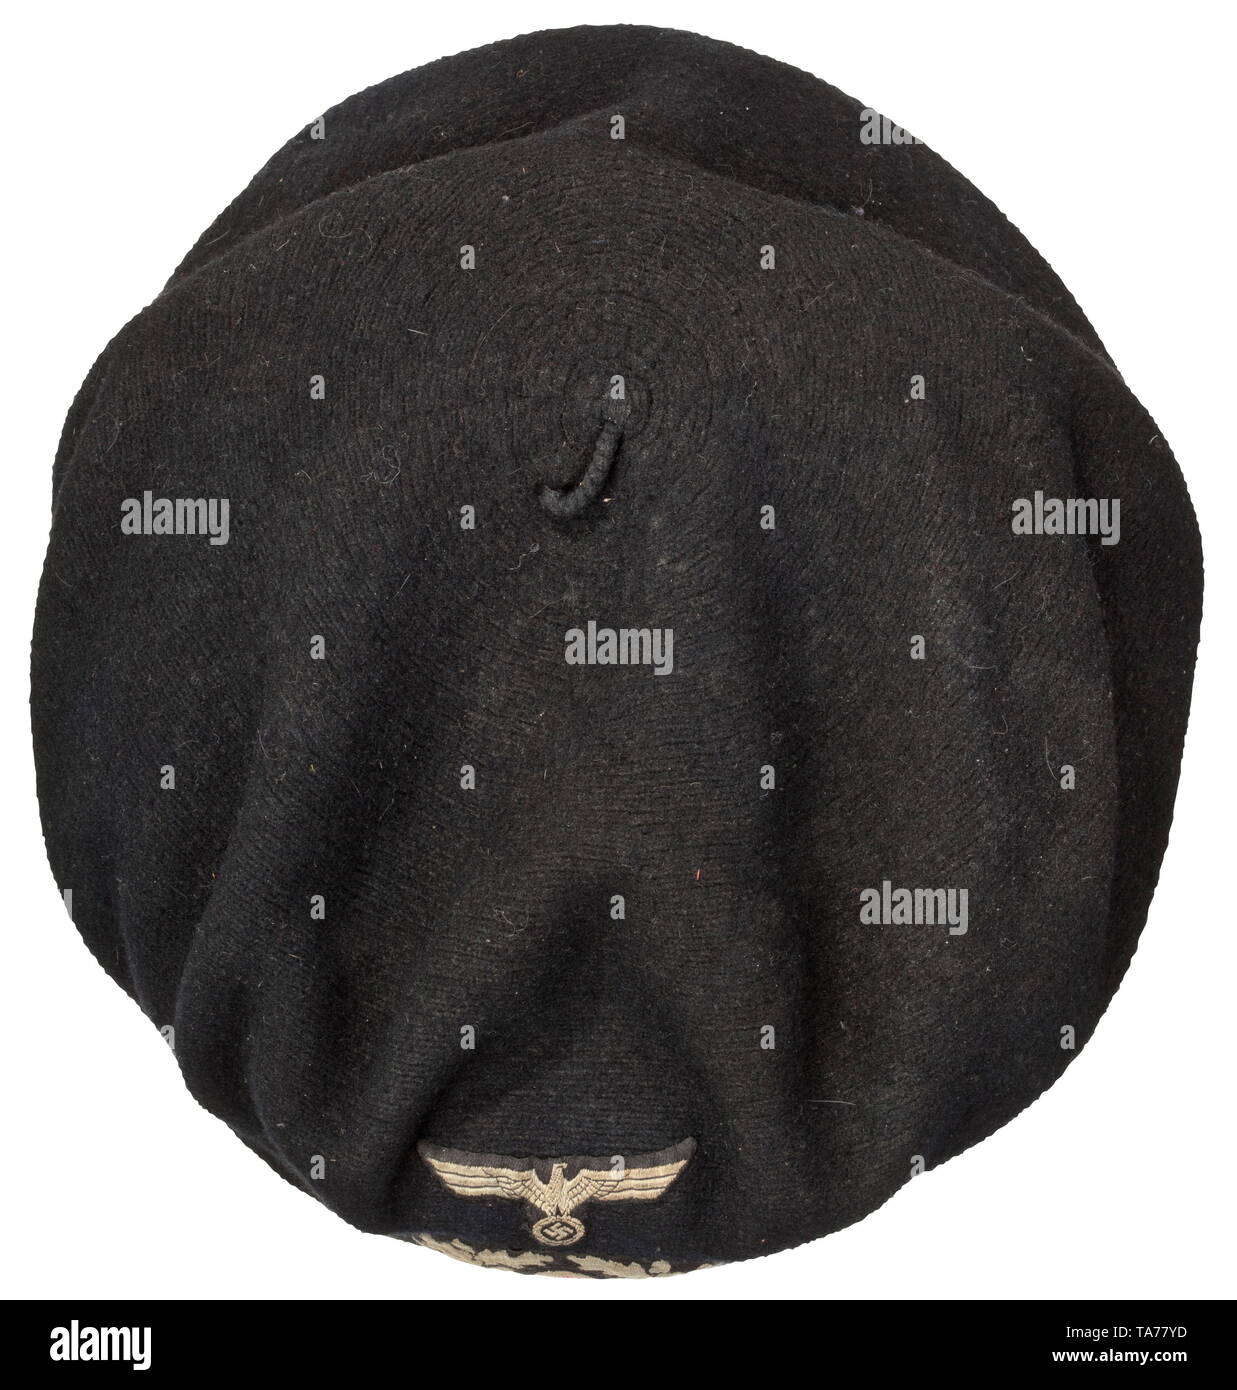 https://c8.alamy.com/comp/TA77YD/a-protective-panzer-beret-complete-with-removable-cover-padded-body-with-black-felt-finishing-coat-six-large-rubber-ventilation-rivets-six-section-black-oil-cloth-liner-with-brown-leather-sweatband-supply-stamping-black-knitted-cover-in-the-shape-of-a-beret-with-late-grey-woven-emblems-on-a-black-base-size-57-historic-historical-army-armies-armed-forces-military-militaria-object-objects-stills-clipping-clippings-cut-out-cut-out-cut-outs-20th-century-editorial-use-only-TA77YD.jpg